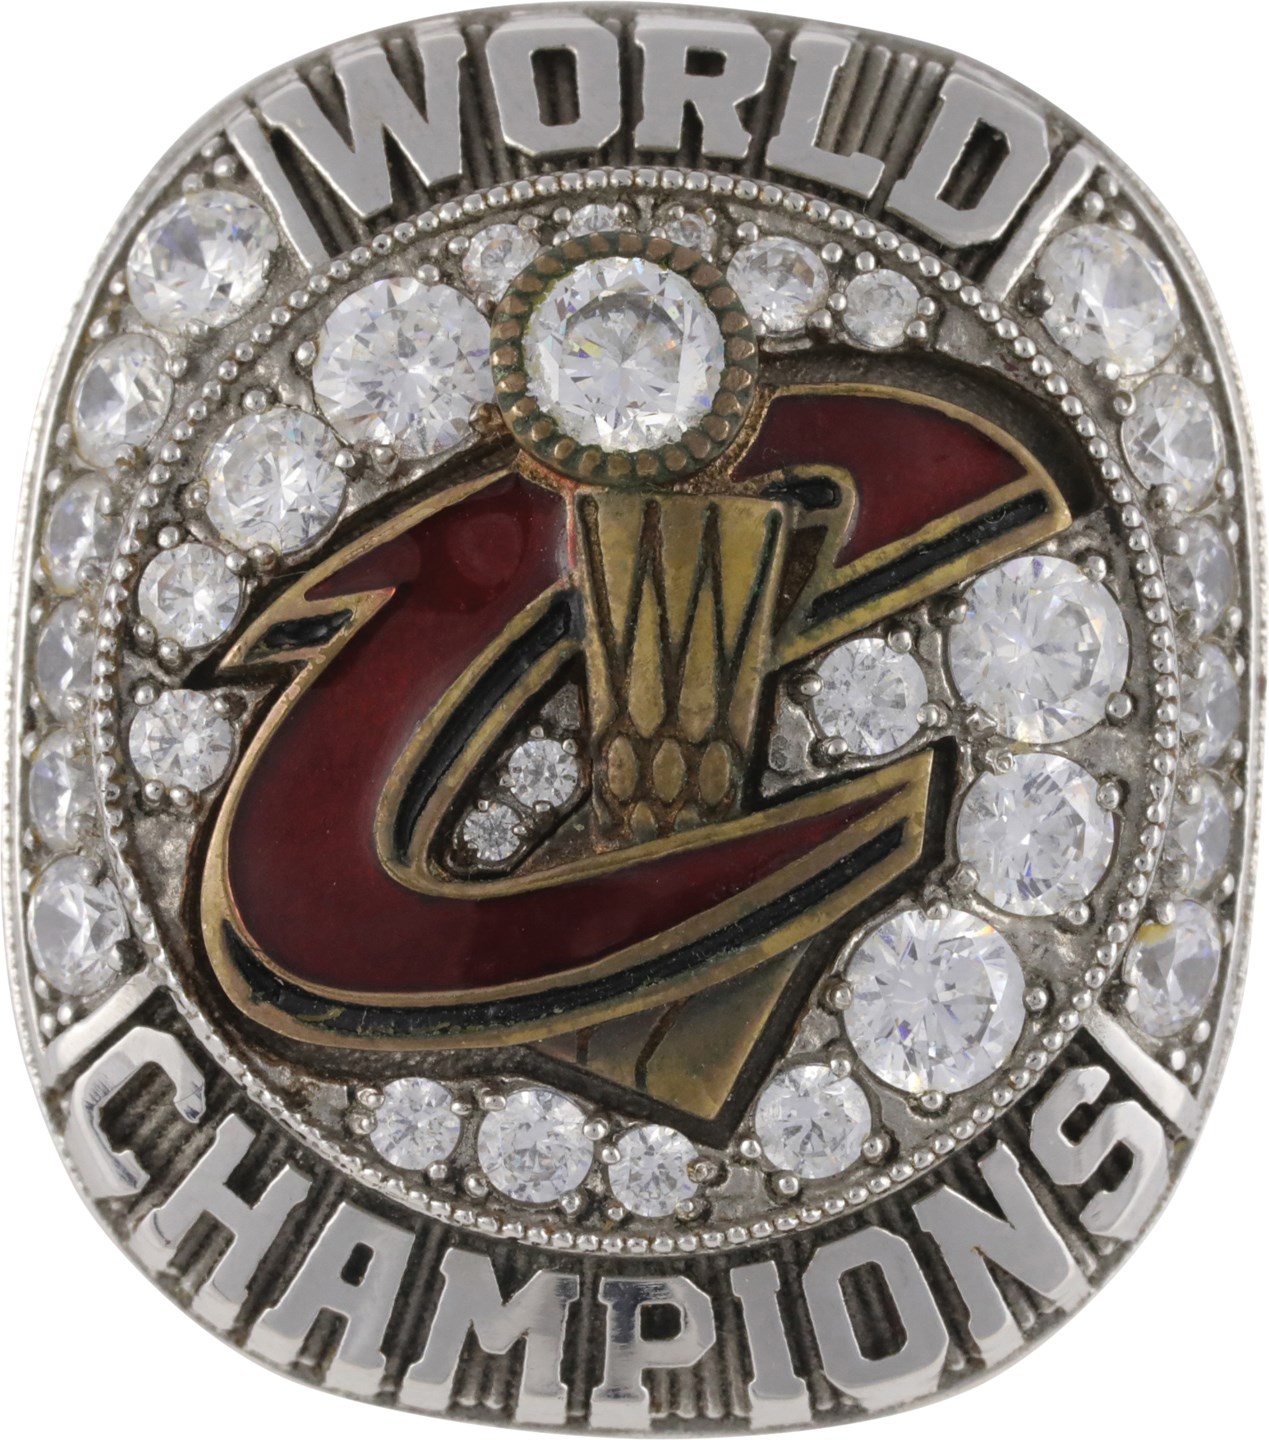 - 2016 Cleveland Cavaliers Championship Staff Ring